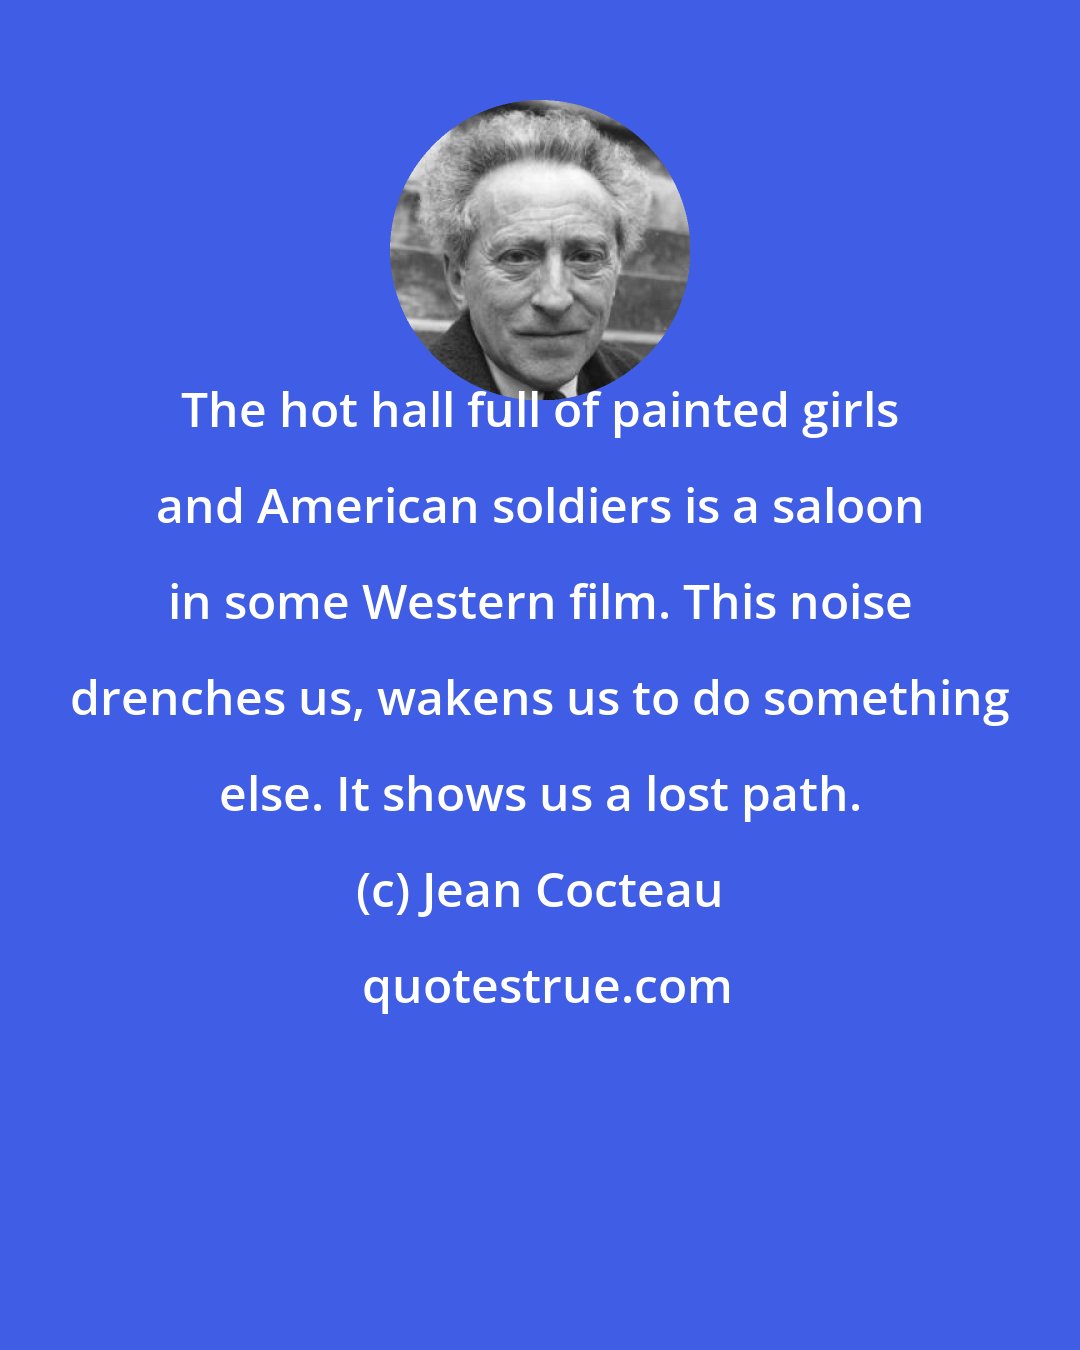 Jean Cocteau: The hot hall full of painted girls and American soldiers is a saloon in some Western film. This noise drenches us, wakens us to do something else. It shows us a lost path.